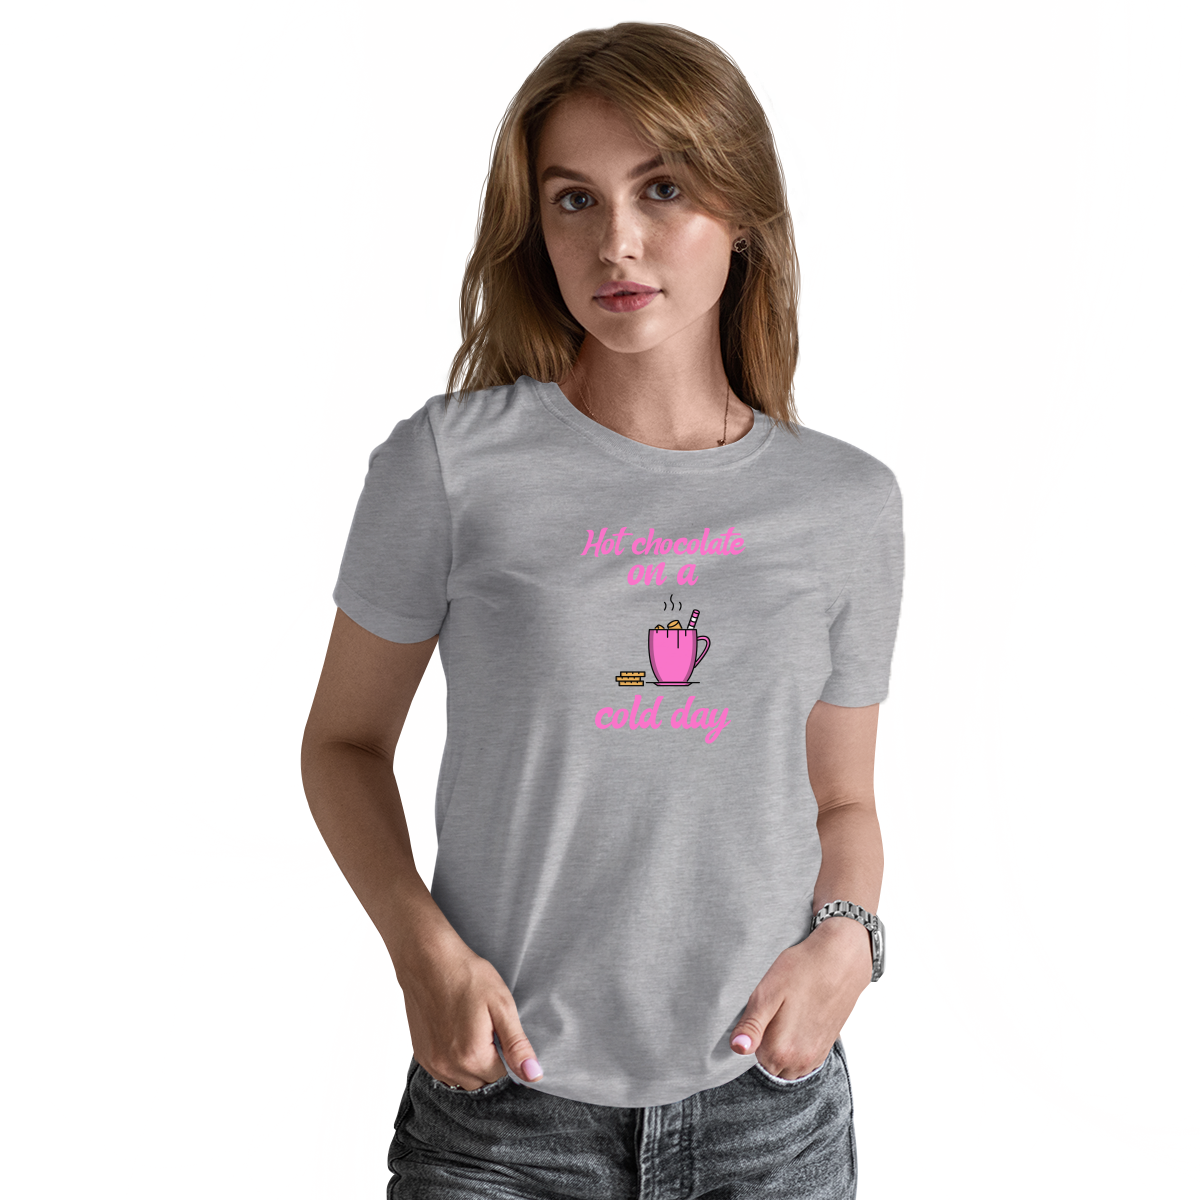 Hot Chocolate on a Cold Day Women's T-shirt | Gray